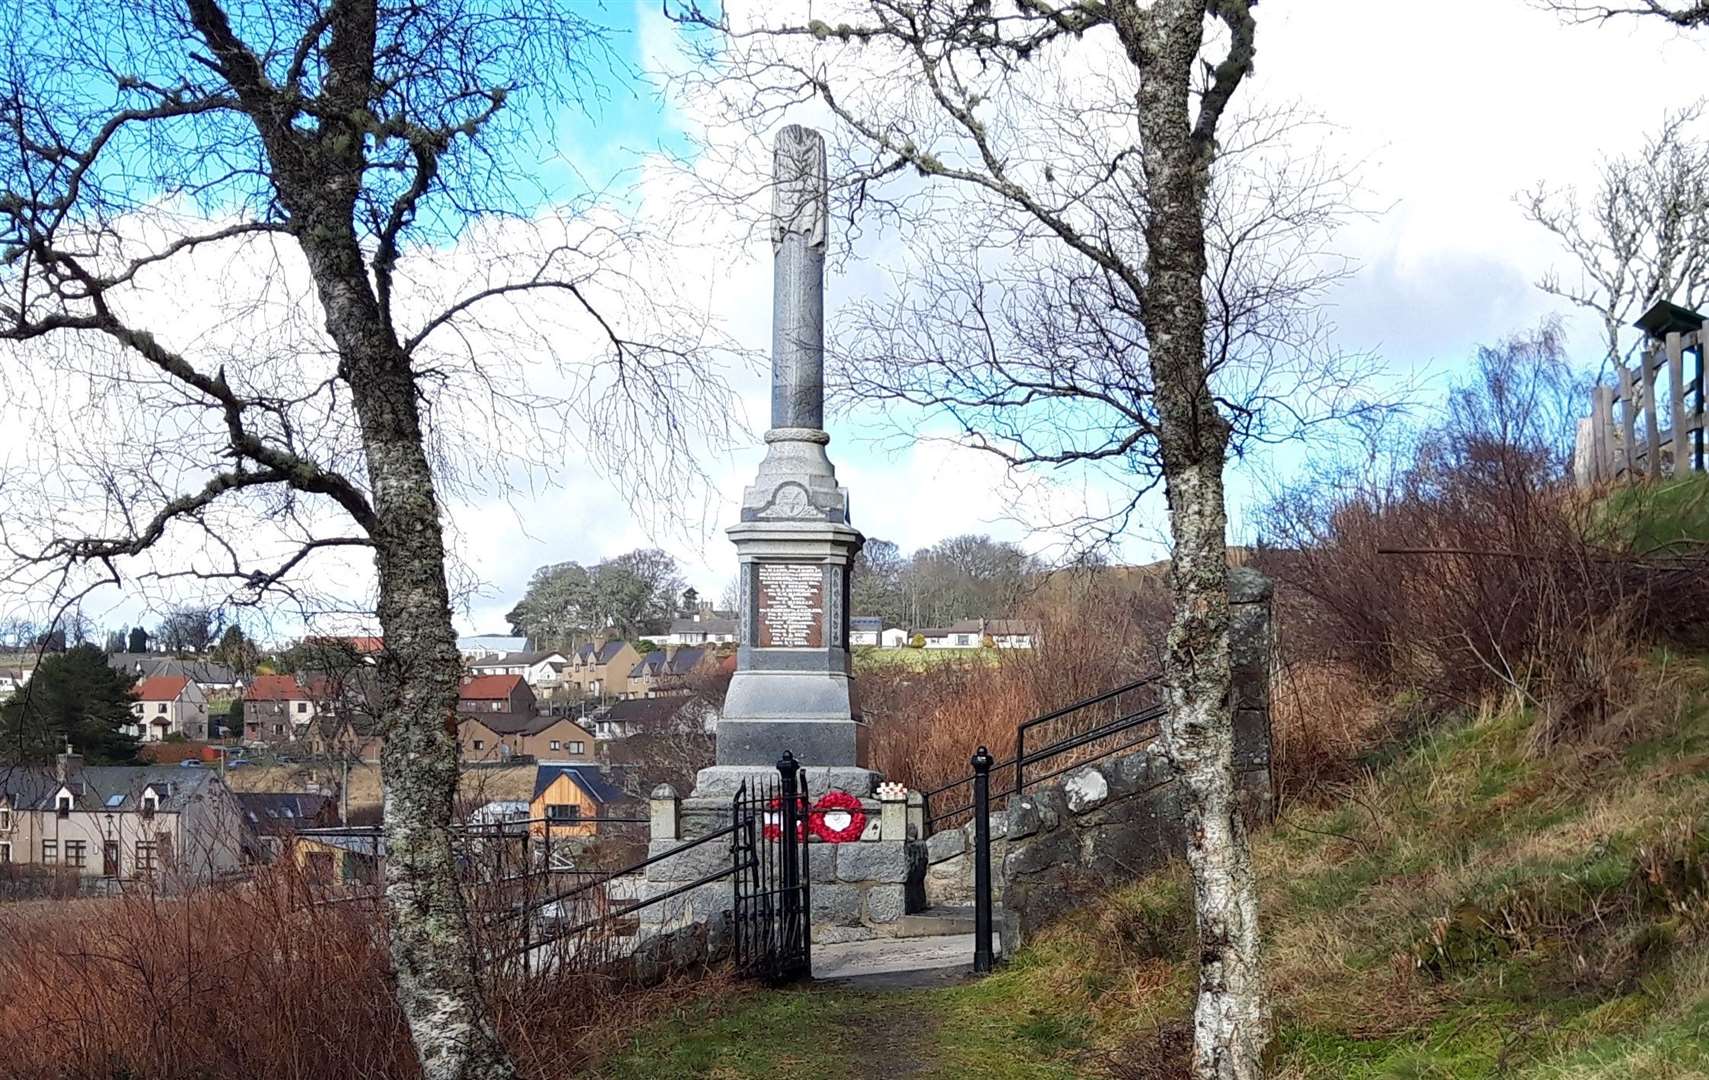 An event will be held on September 30 to mark the centenary of Lairg war memorial.